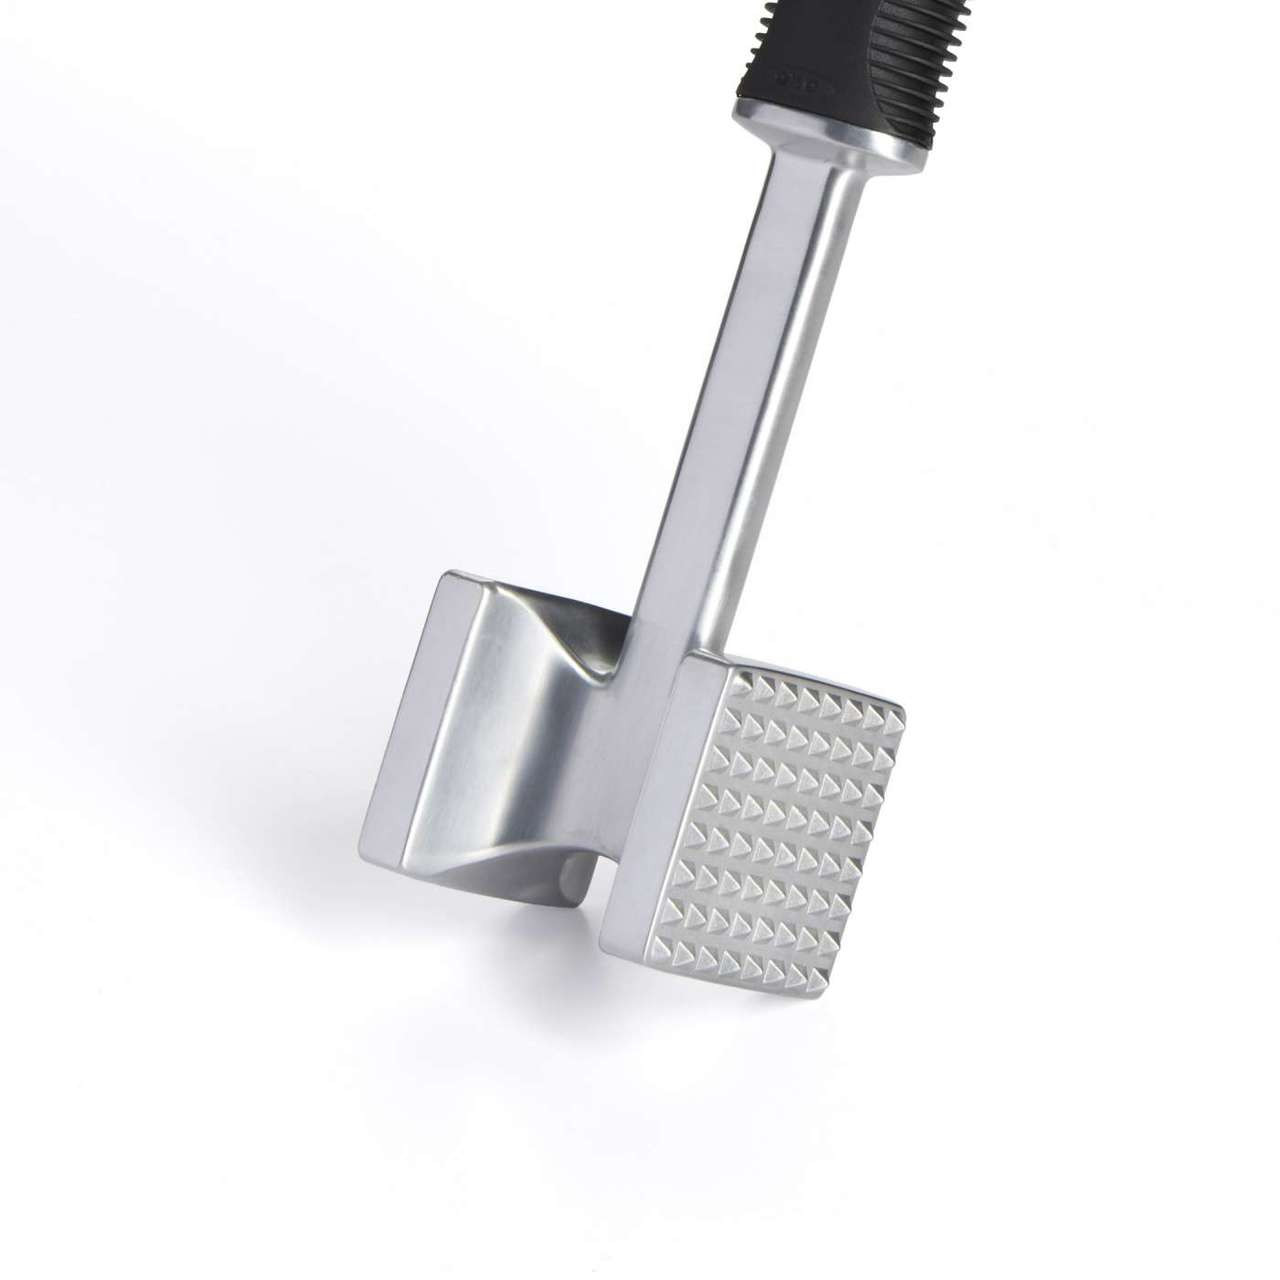 NEW OXO Good Grips Meat Tenderizer & Good Grips Ground Meat Chopper